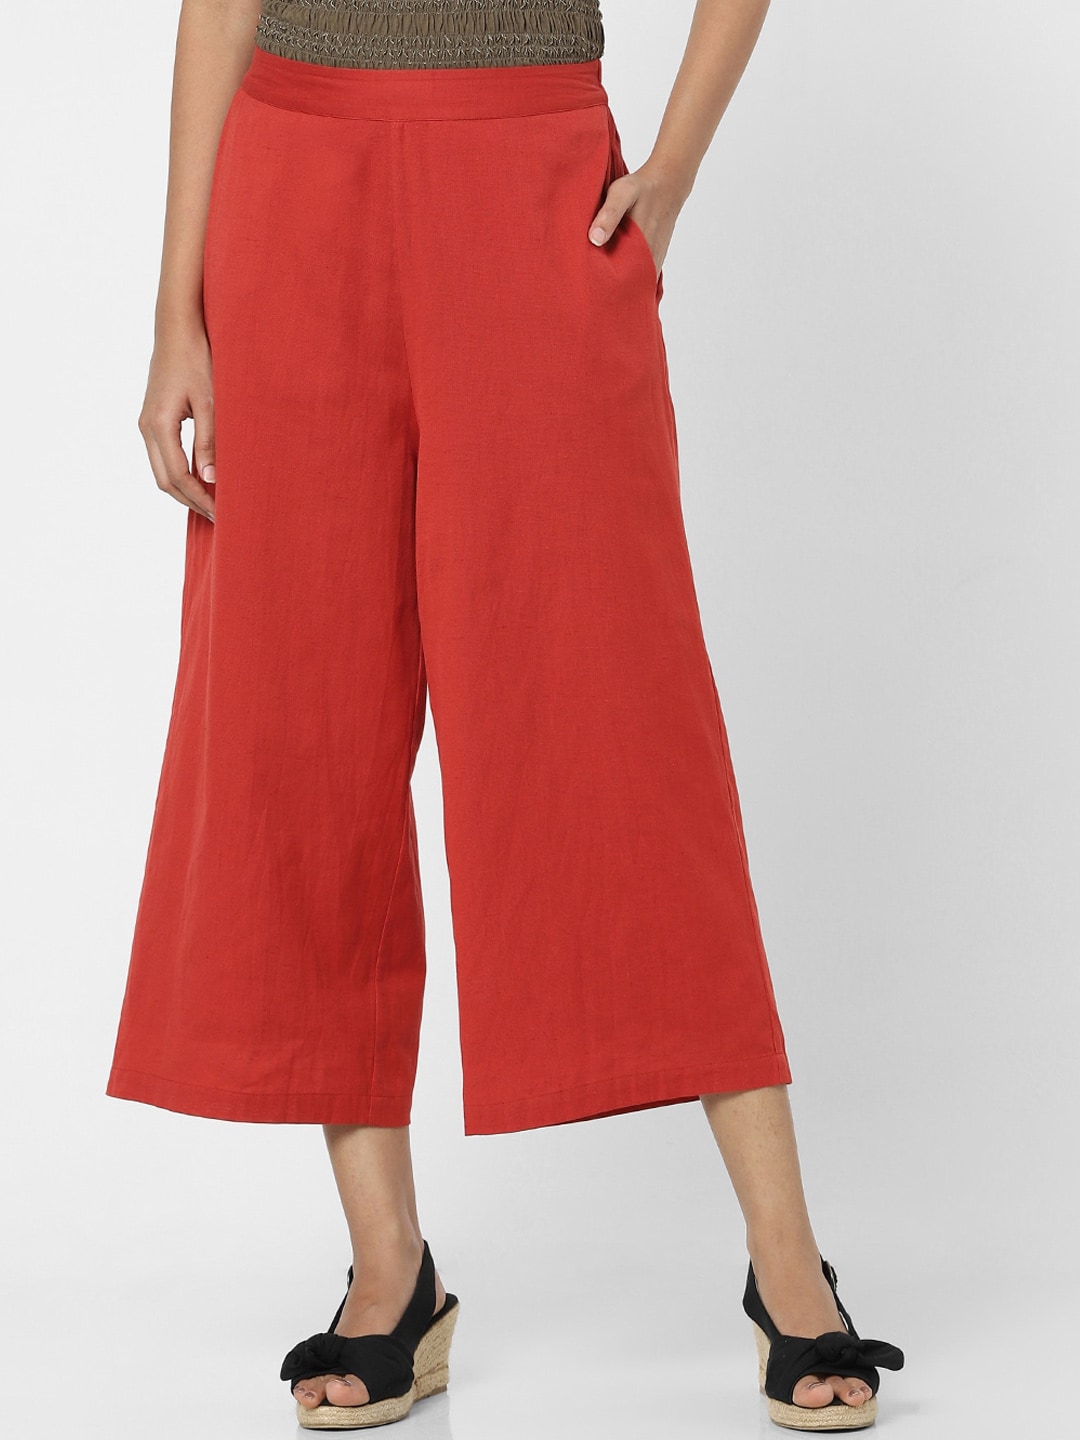 Vero Moda Women Red Solid Flared Culottes Trousers Price in India